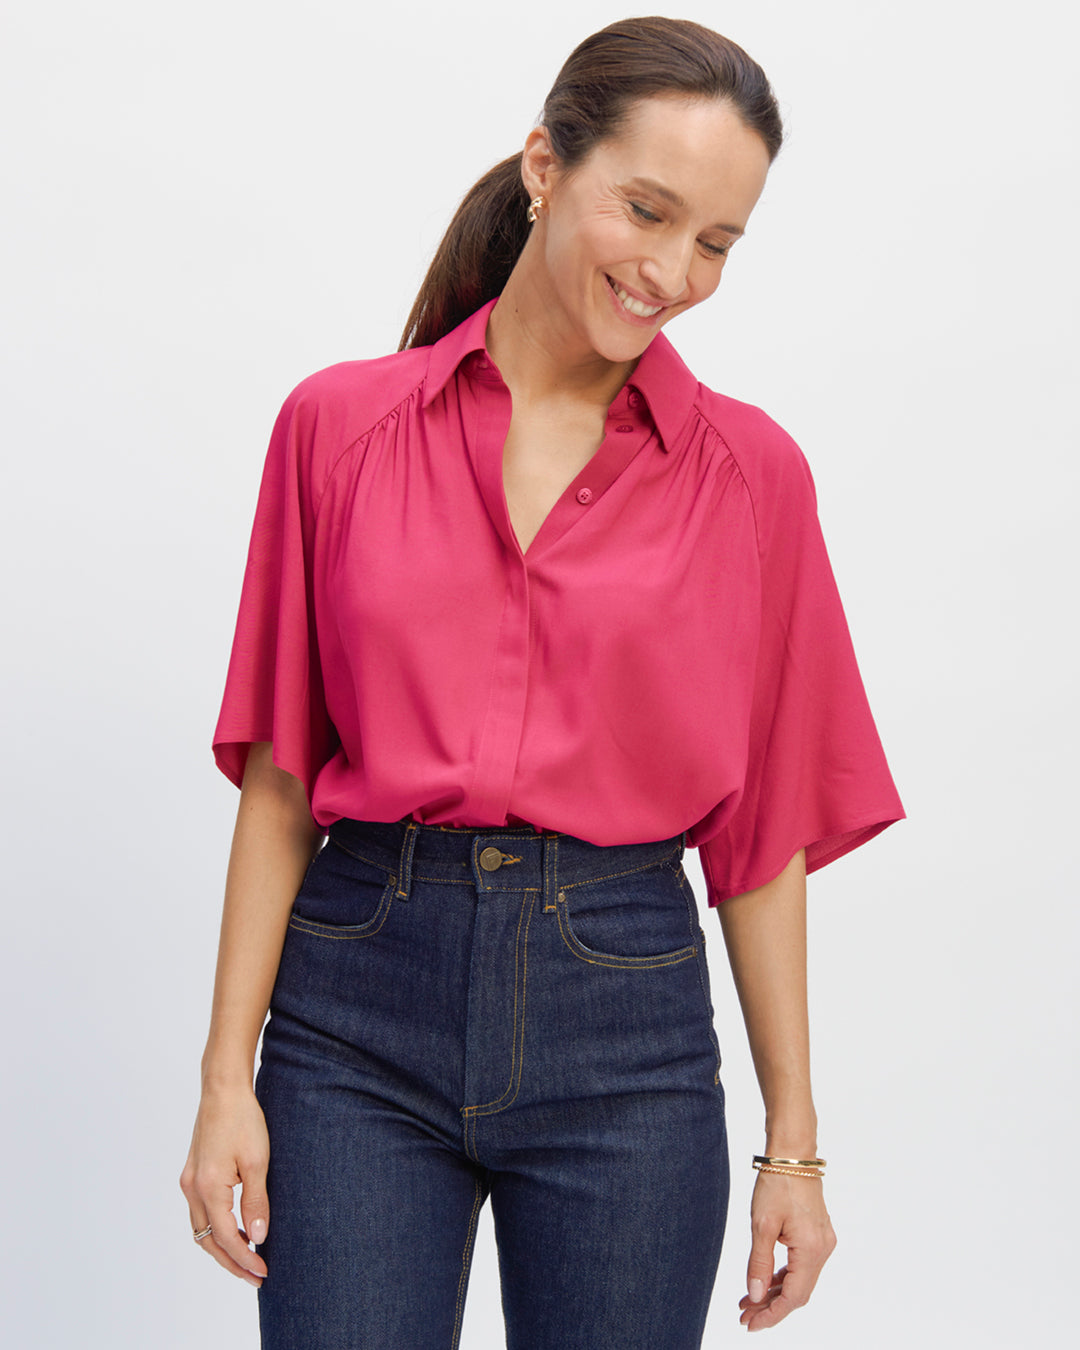 blouse-pink-collar-blouse-sleeves-raglan-button-placket-cache-fronces-front-and-back-17H10-tailleurs-for-women-paris-